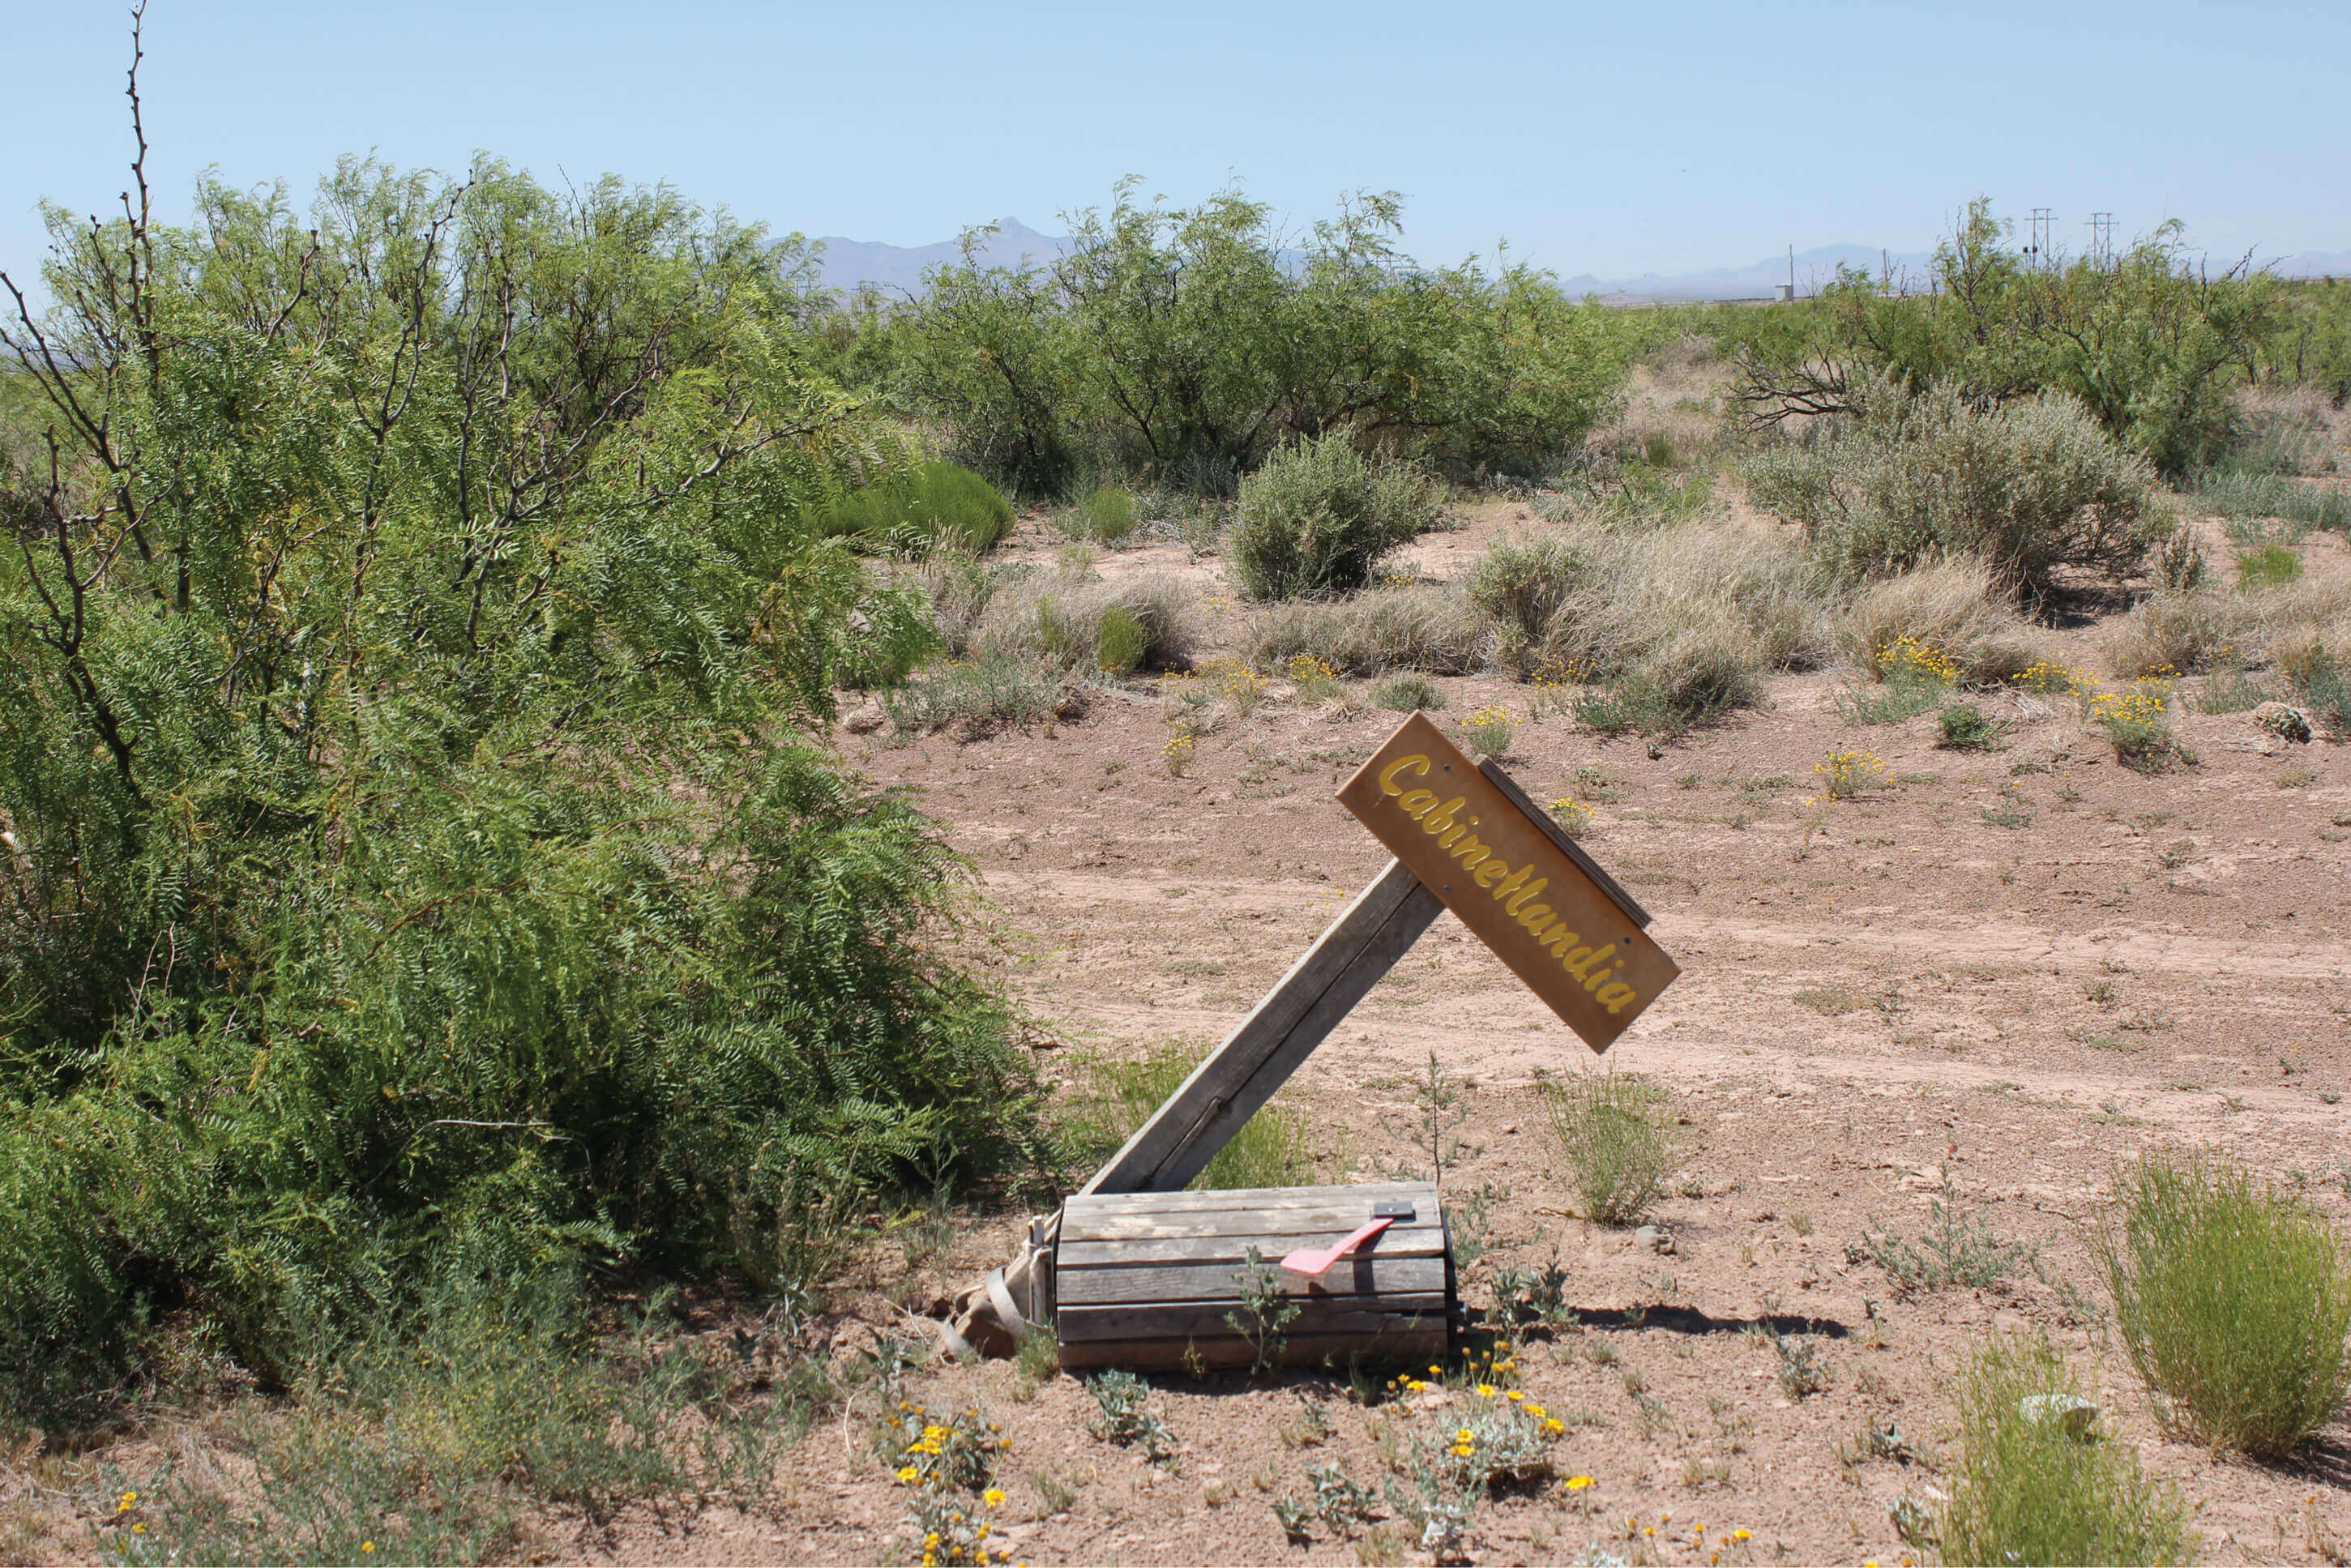 A photograph of a weathered “Cabinetlandia” sign in the desert.